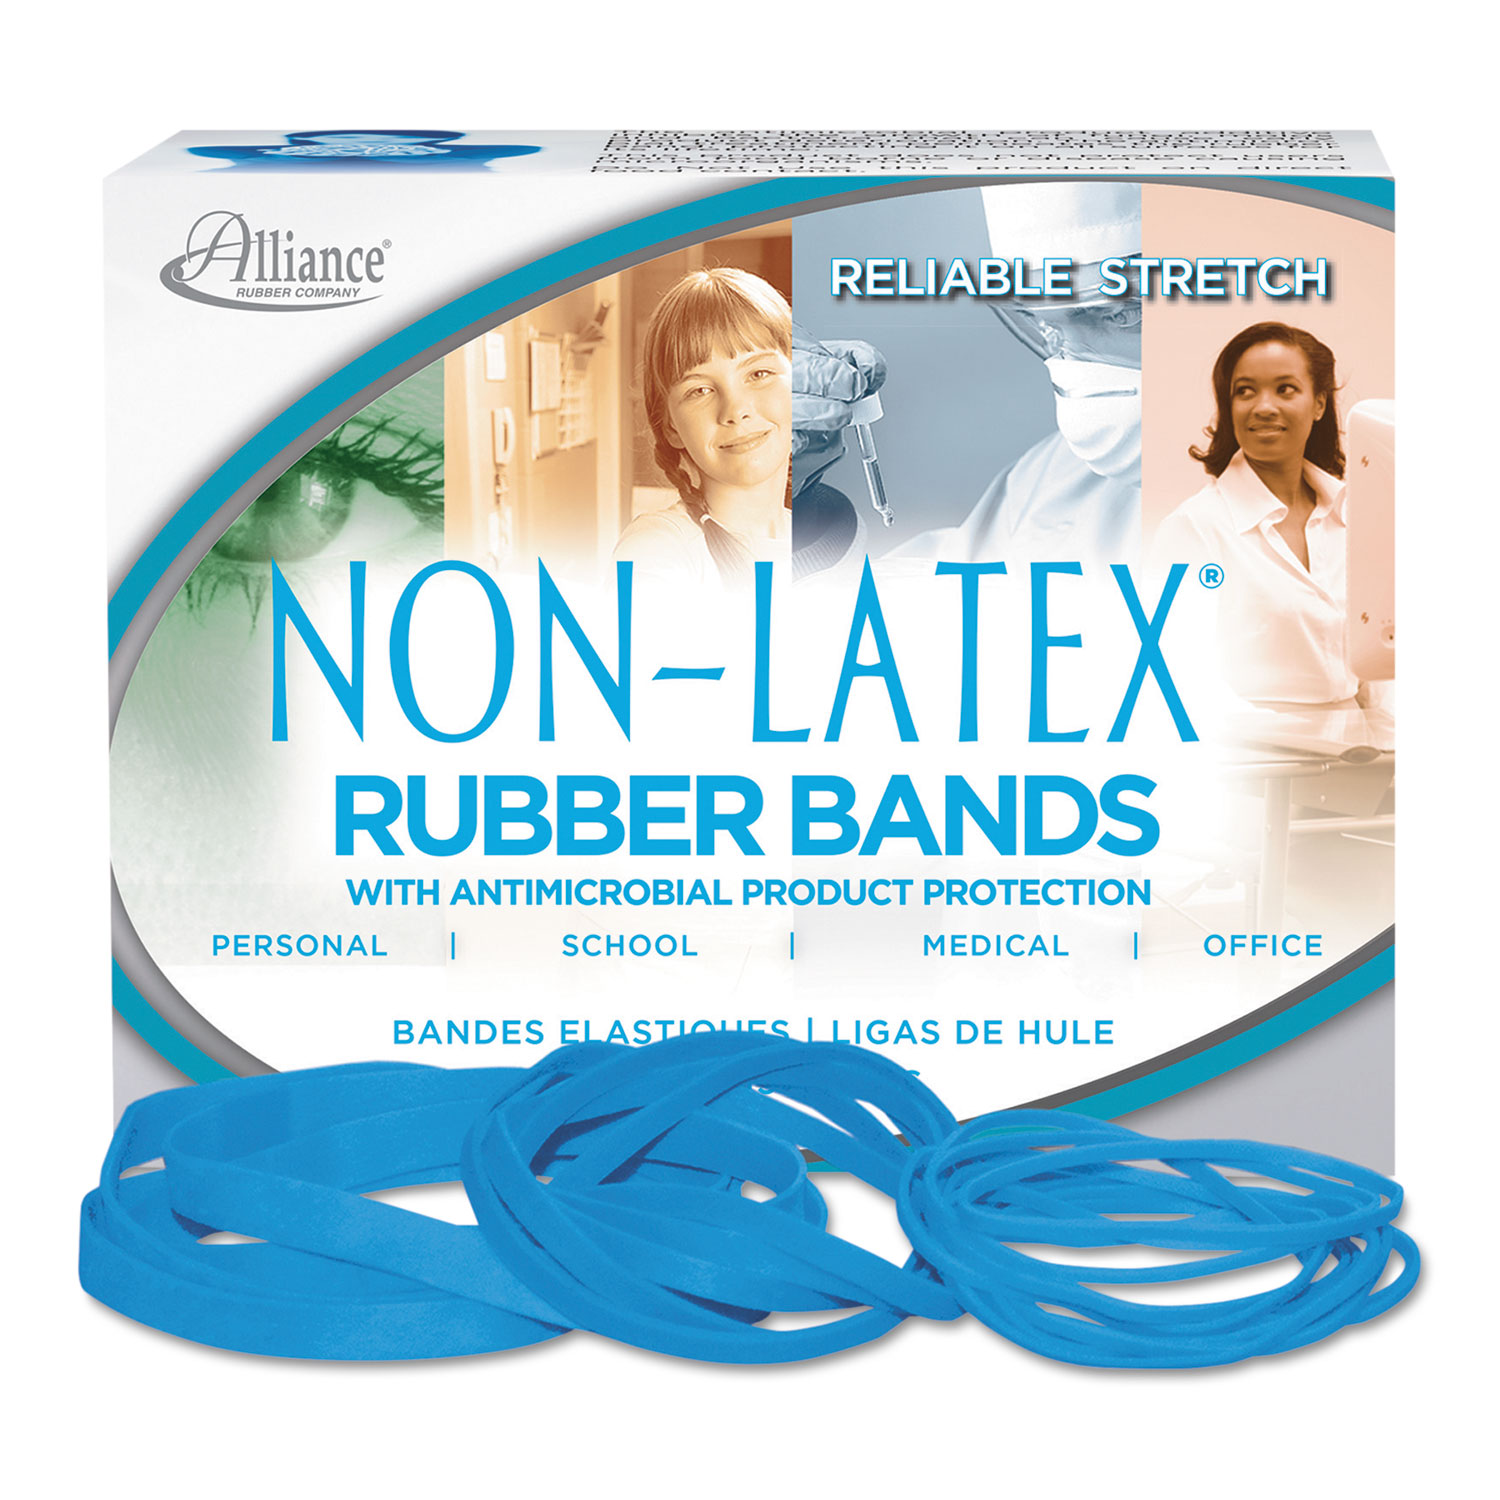  Alliance 42179 Antimicrobial Non-Latex Rubber Bands, Size 117B, 0.06 Gauge, Cyan Blue, 4 oz Box, 62/Box (ALL42179) 